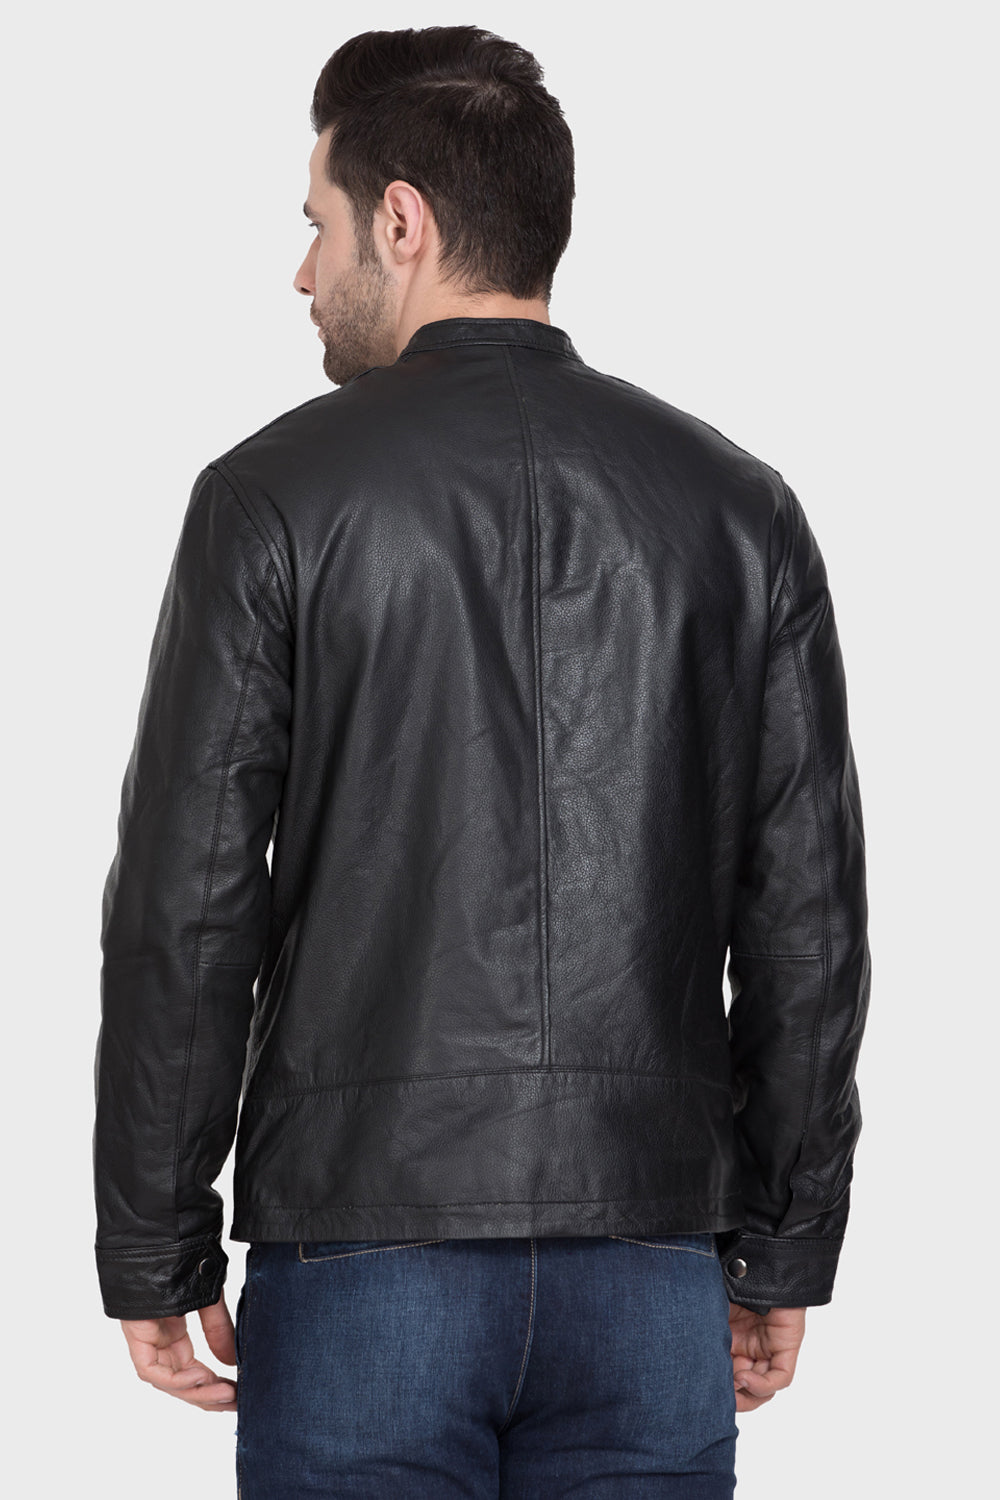 Justanned Black Casual Leather Jacket